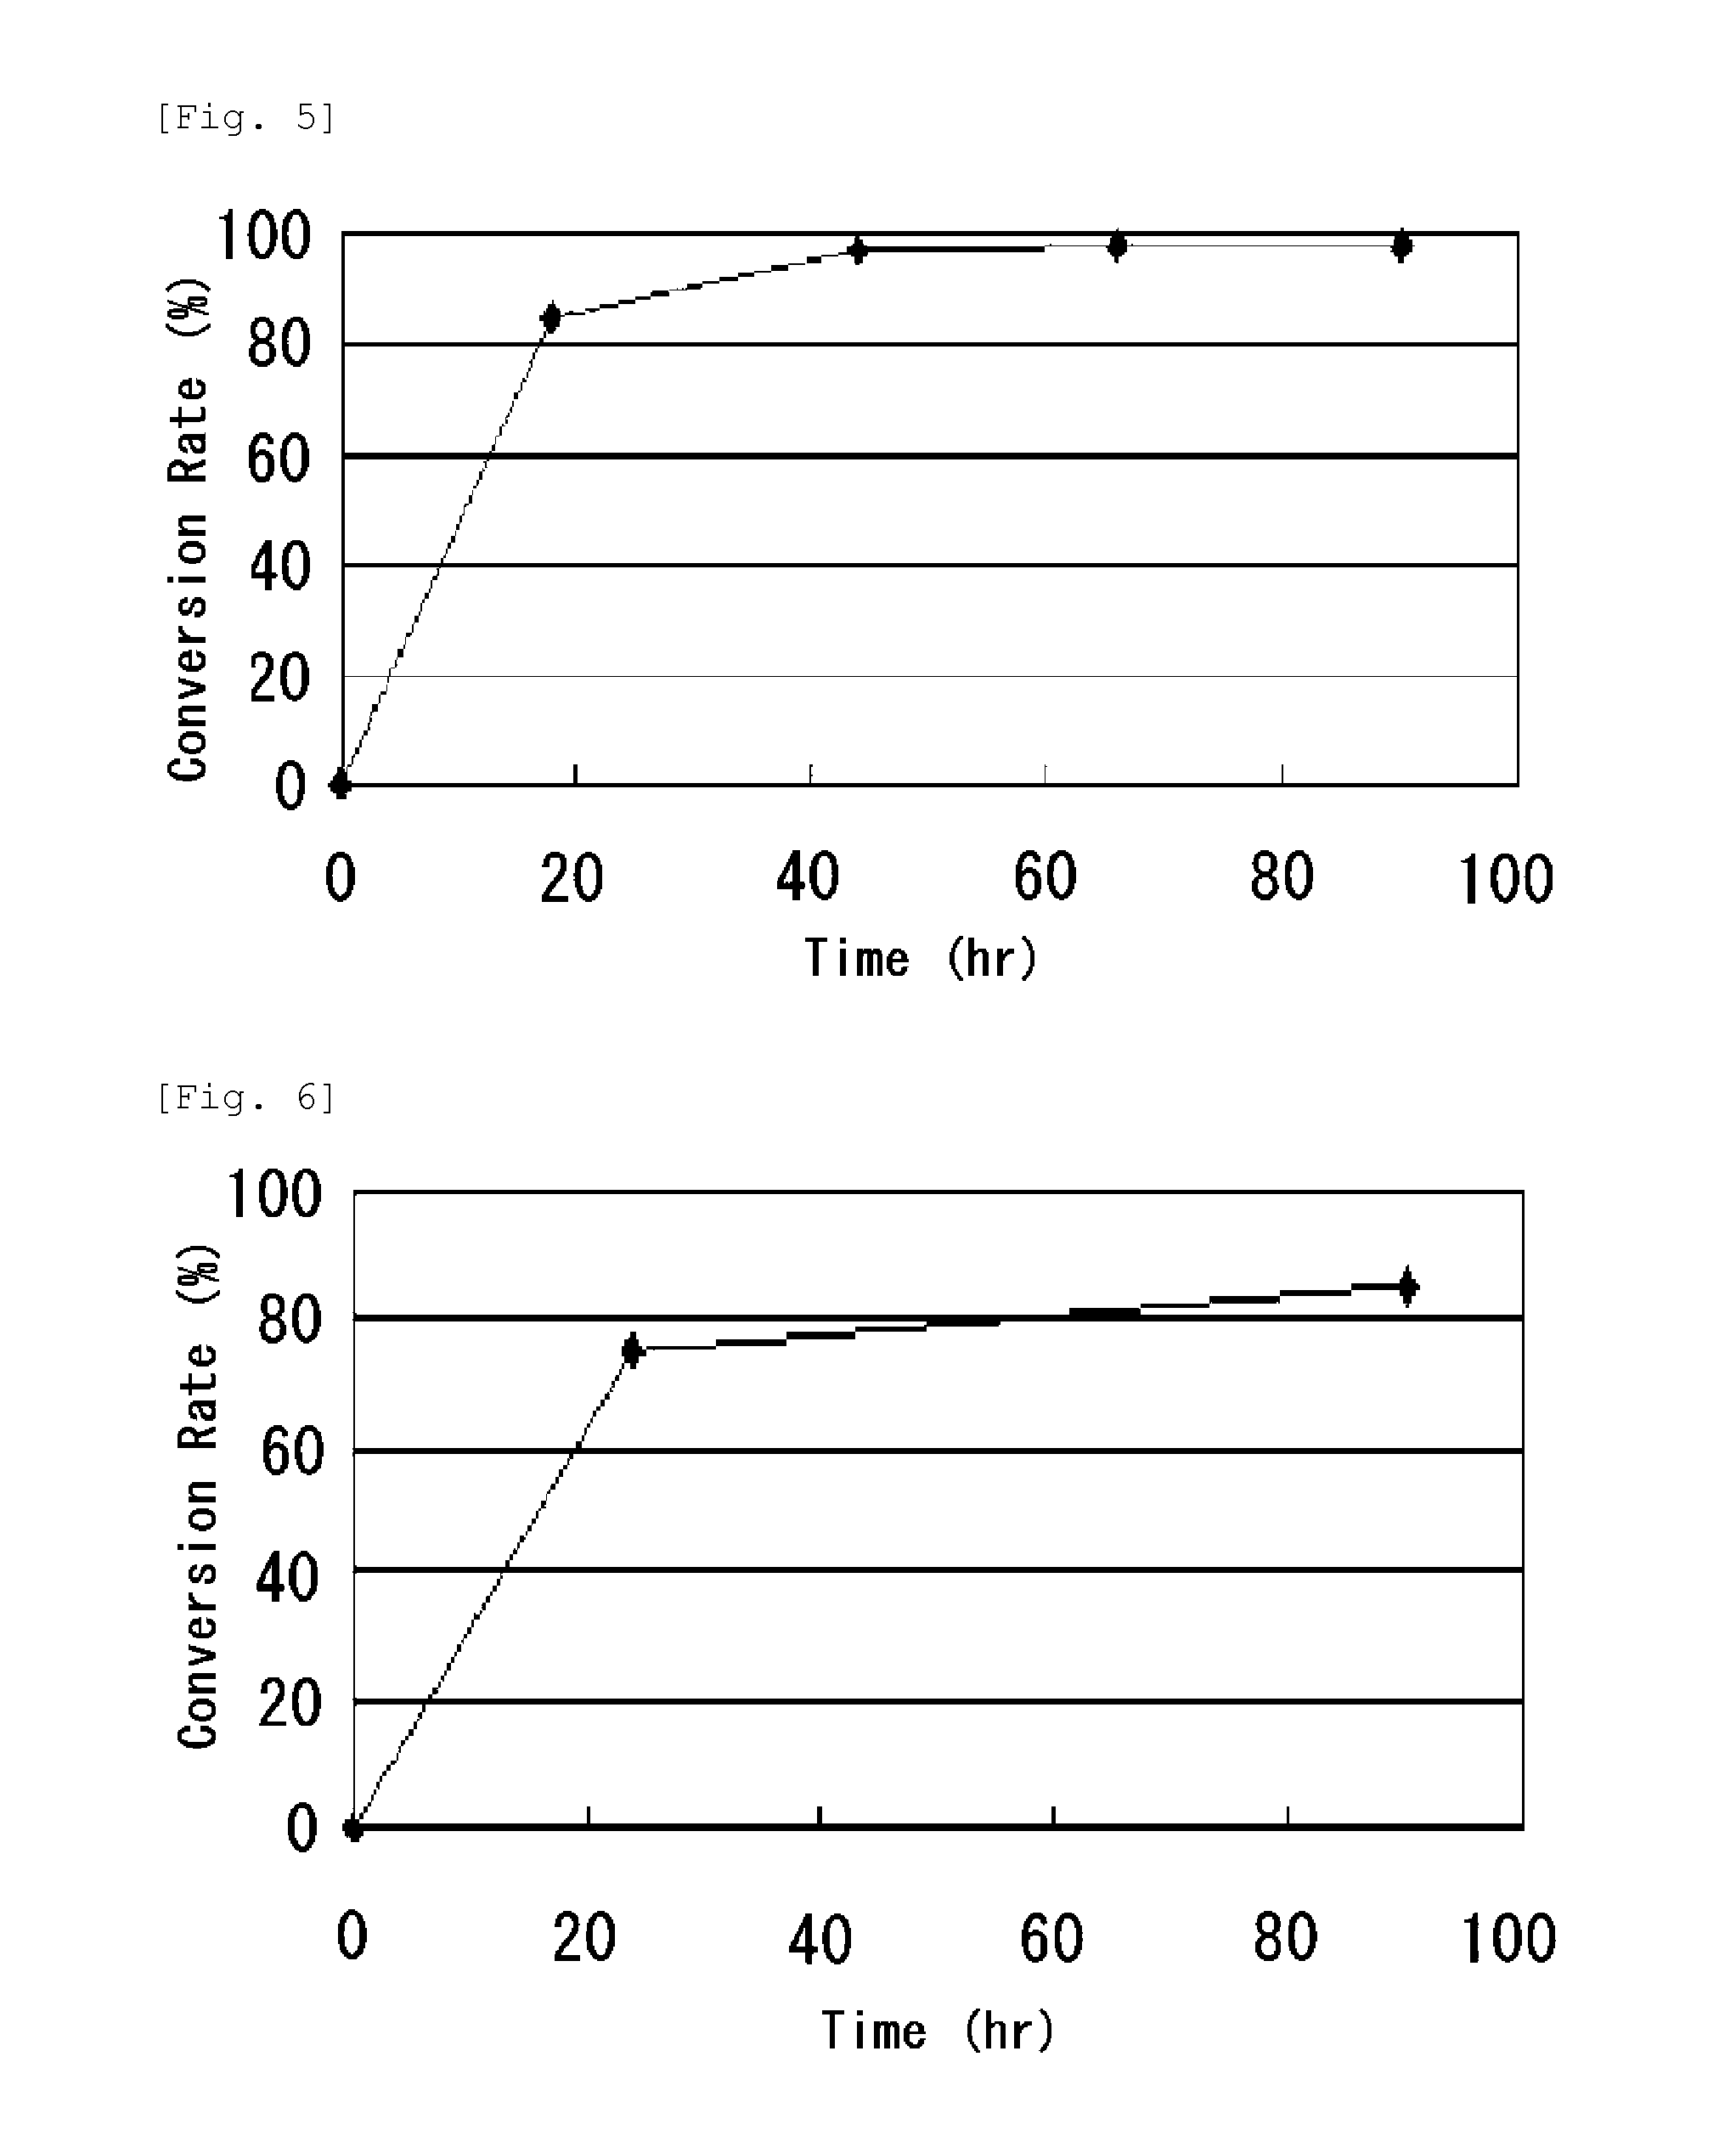 L-succinylaminoacylase and process for producing l-amino acid using it